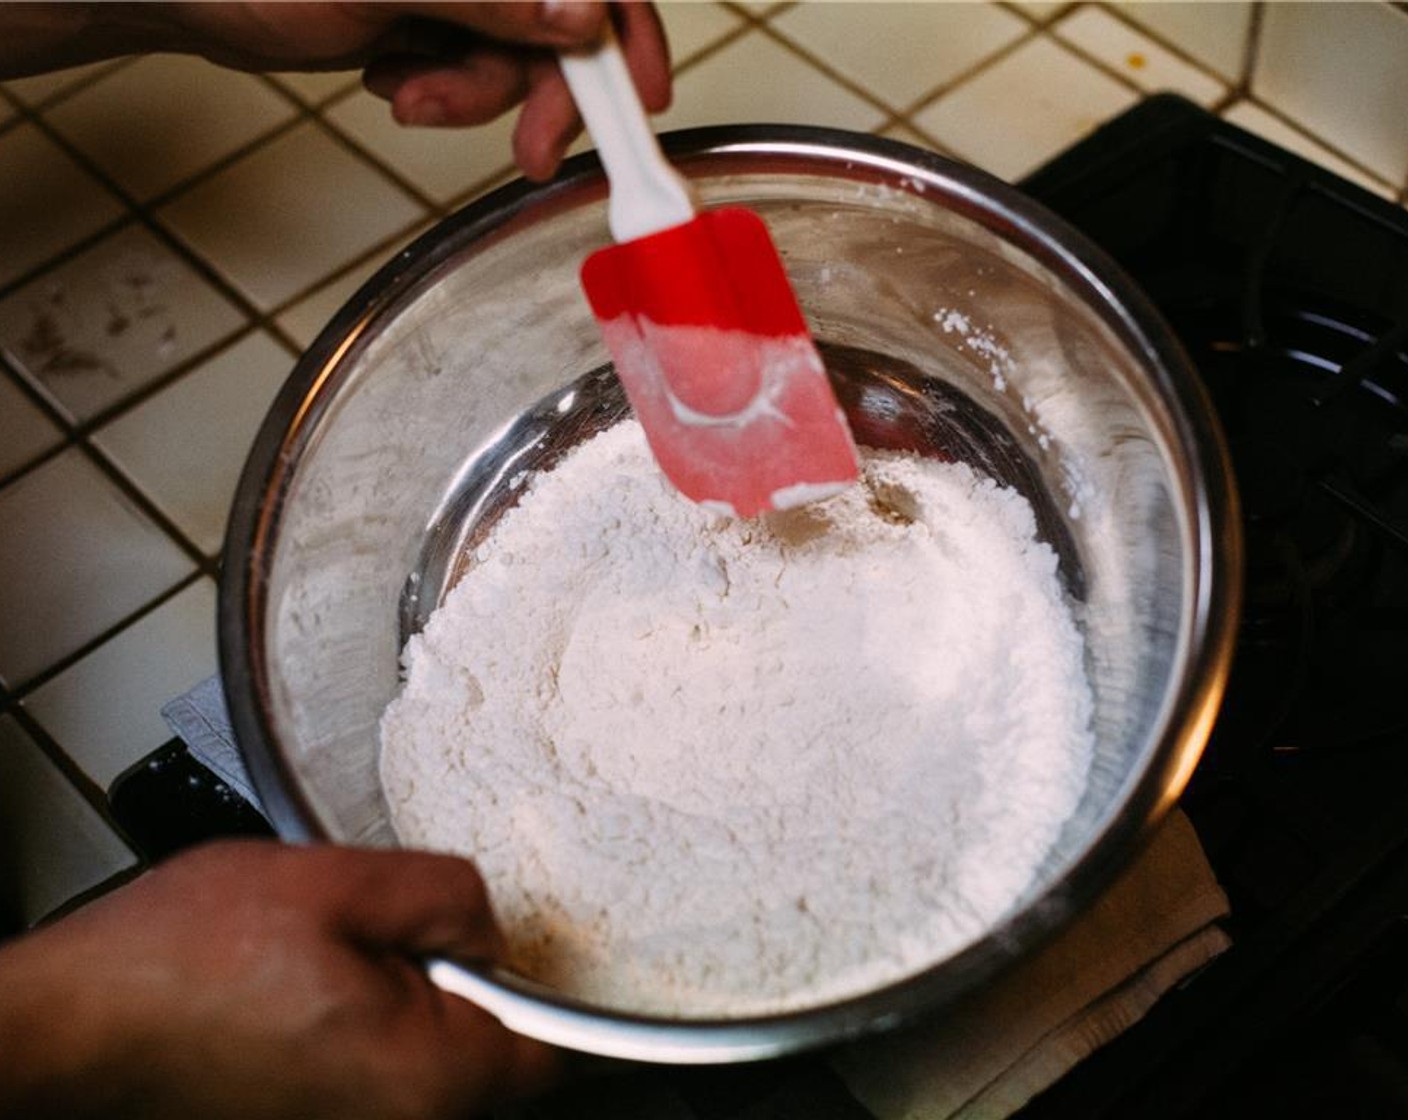 step 2 In a medium bowl, whisk together sifted Pastry Flour (2 1/2 cups), Salt (1/2 tsp), and Baking Soda (1/2 tsp). Make sure to sift the flour before measuring.